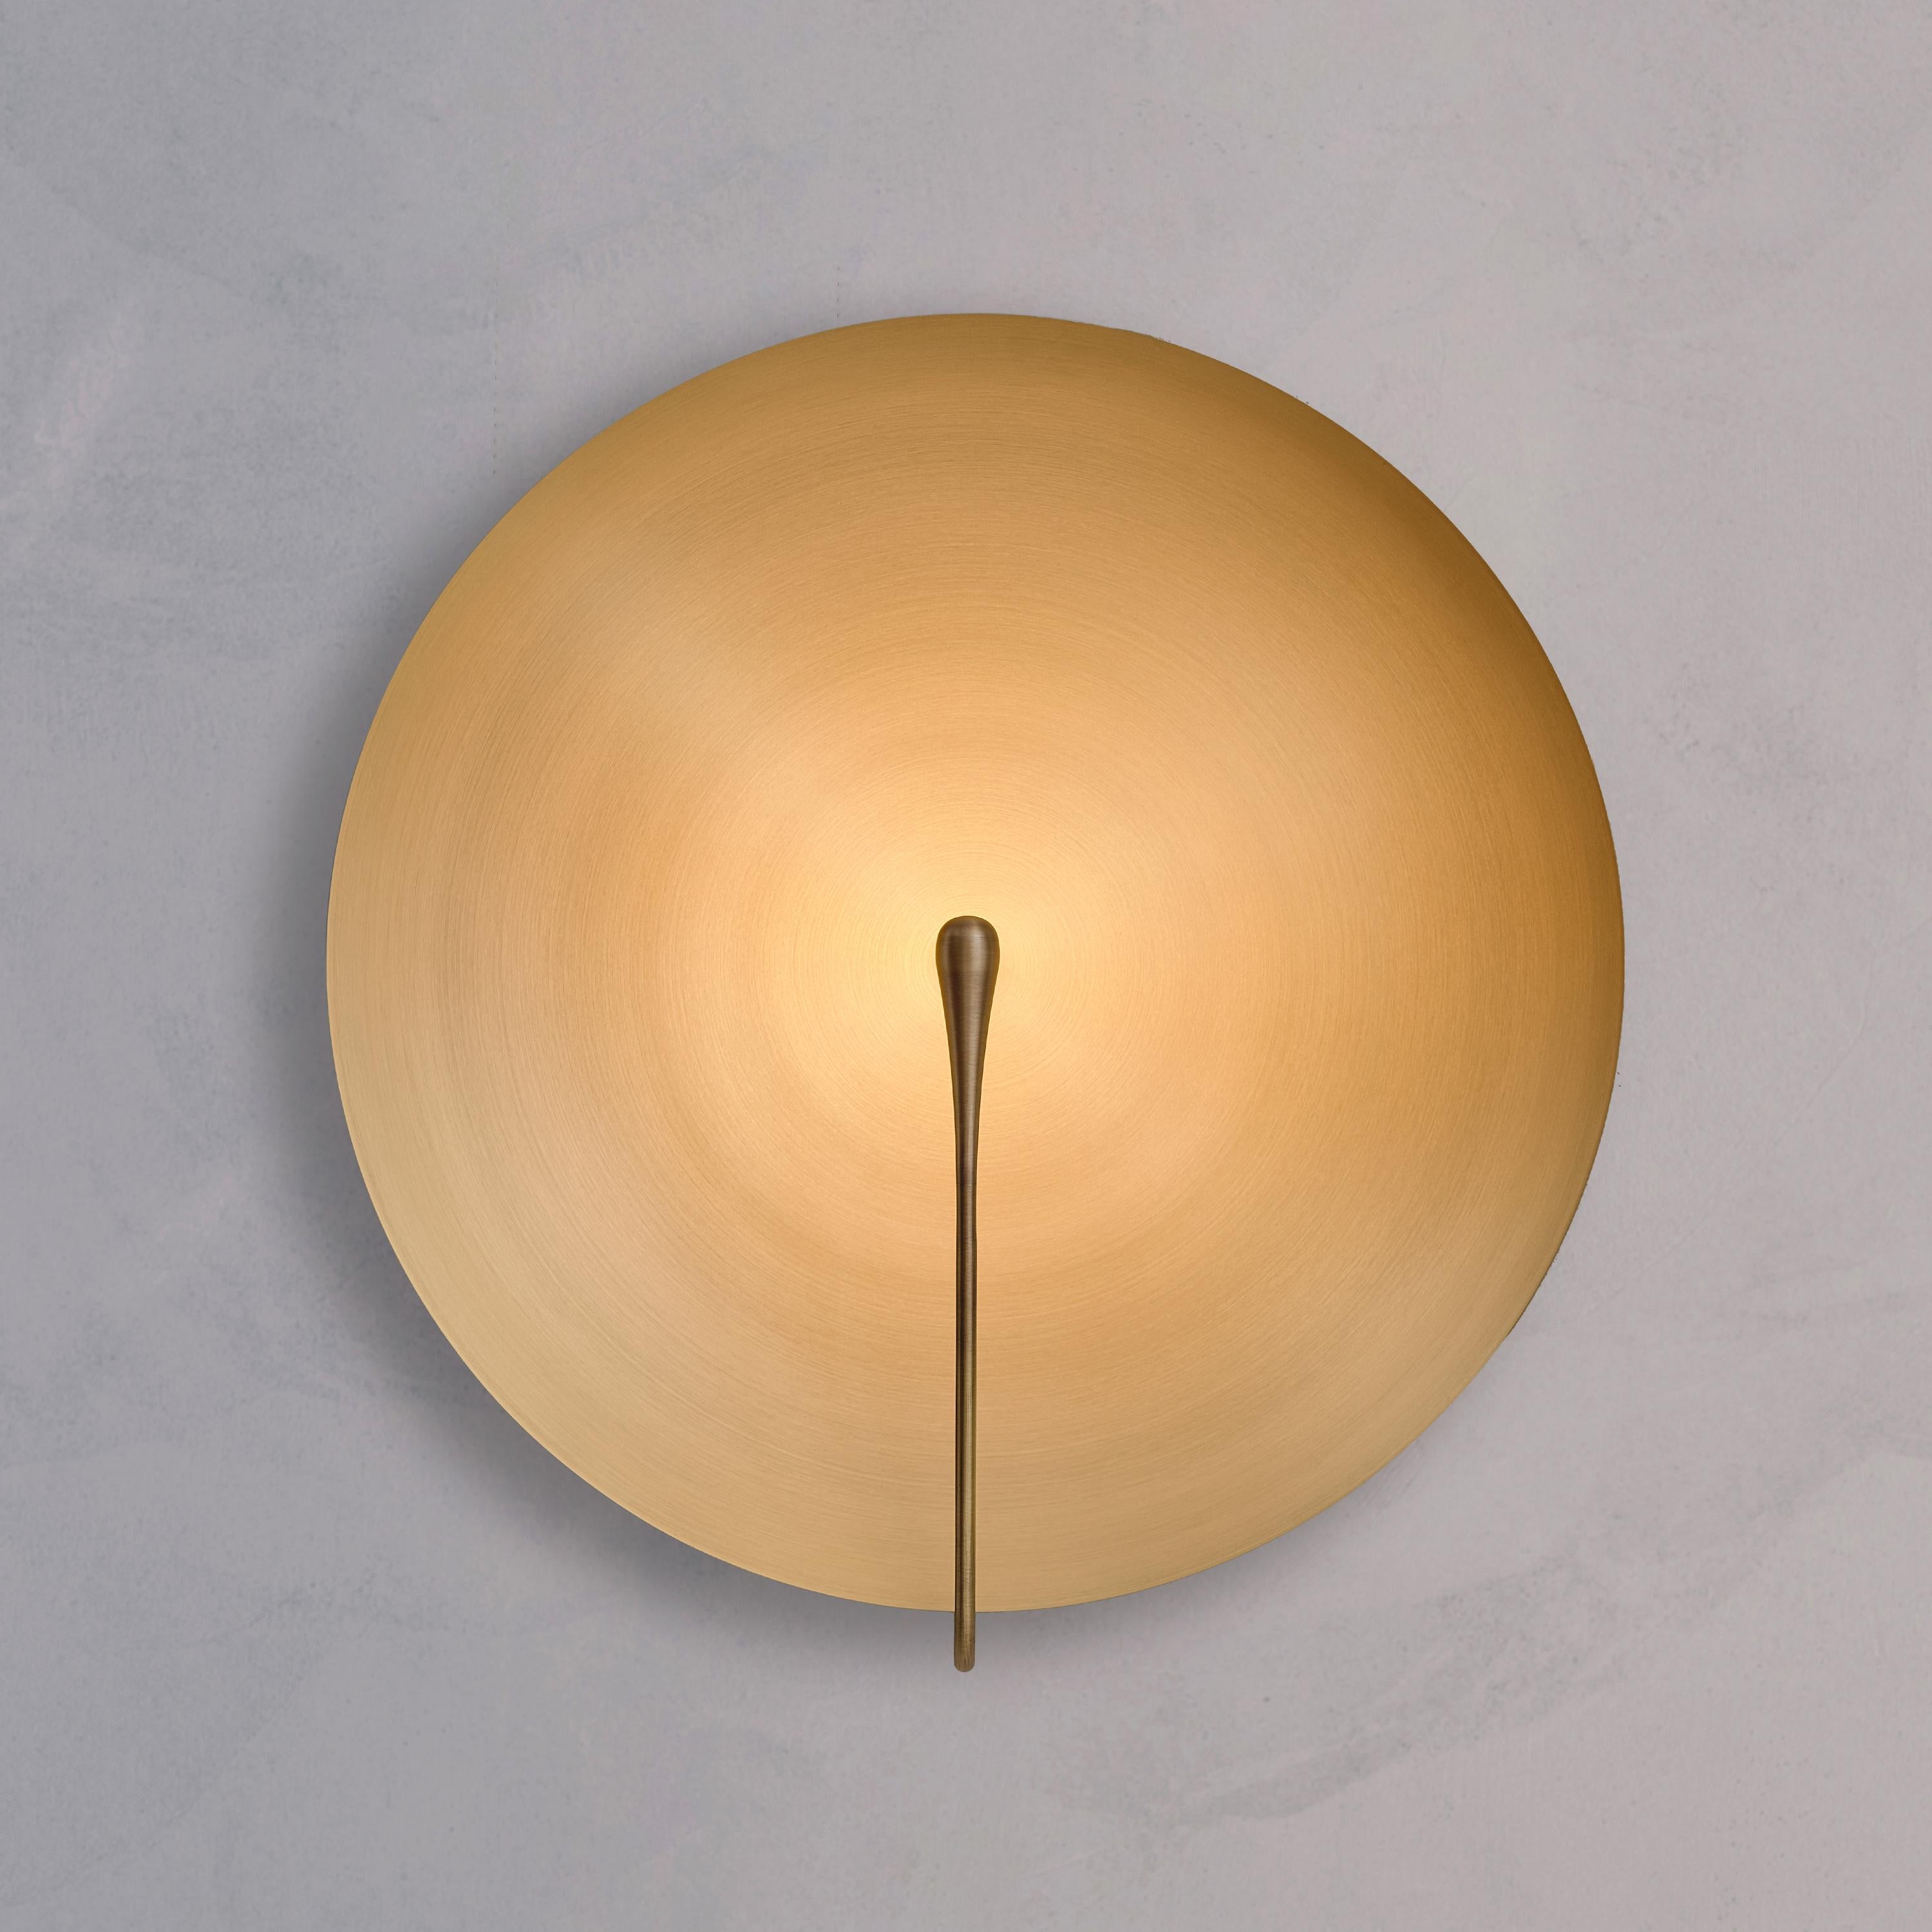 Inspired by the beautiful textures of nature, the surface is a brushed brass finish. Please note that each piece is individually handmade, therefore unique in its own way.
 
Softly illuminated with integrated LED from within, this sculptural wall